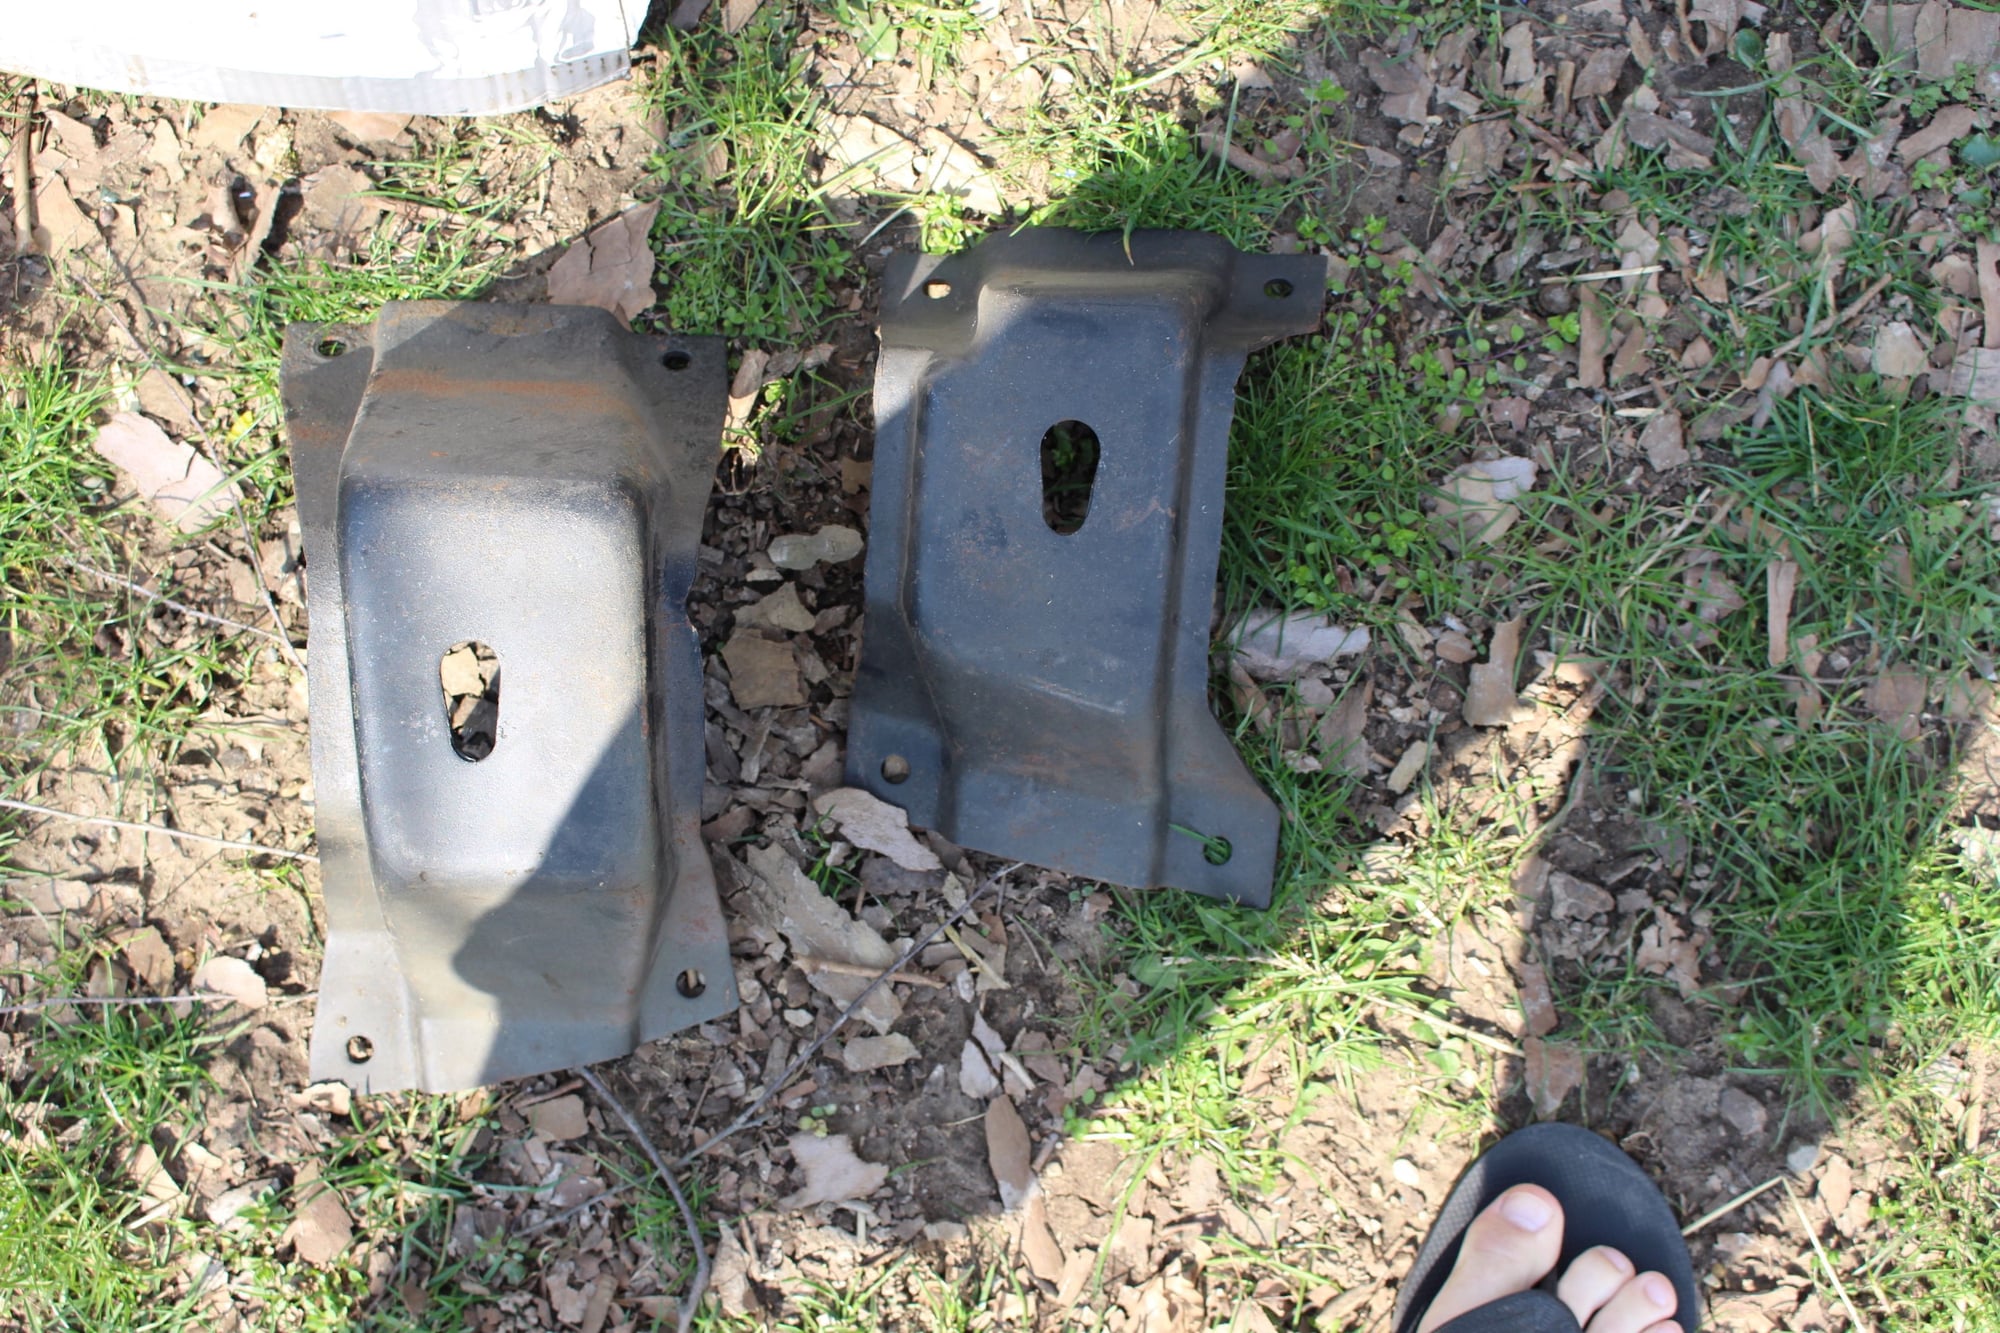 Miscellaneous - 73-79 Truck parts - Used - 1973 to 1979 Ford F Series - Avon, IN 46123, United States